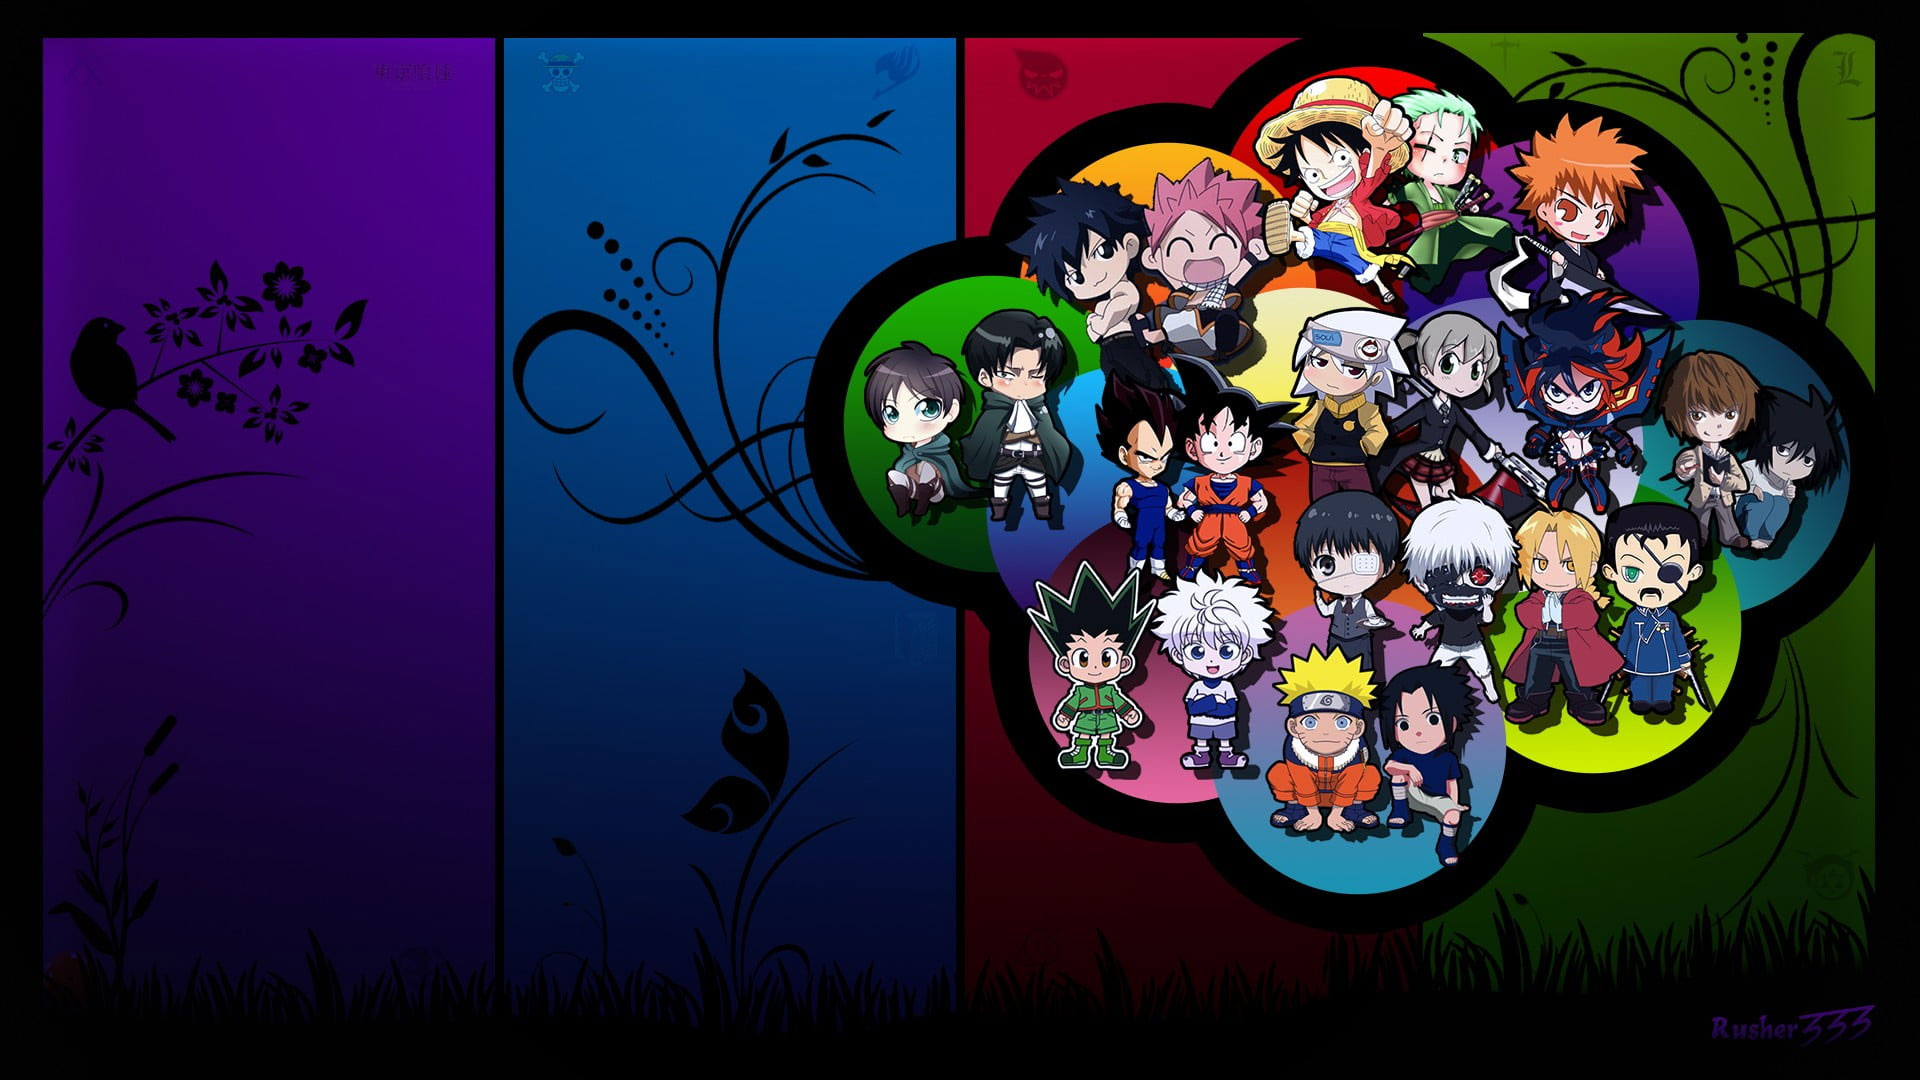 Naruto characters wallpaper, anime character wallpaper, One Piece